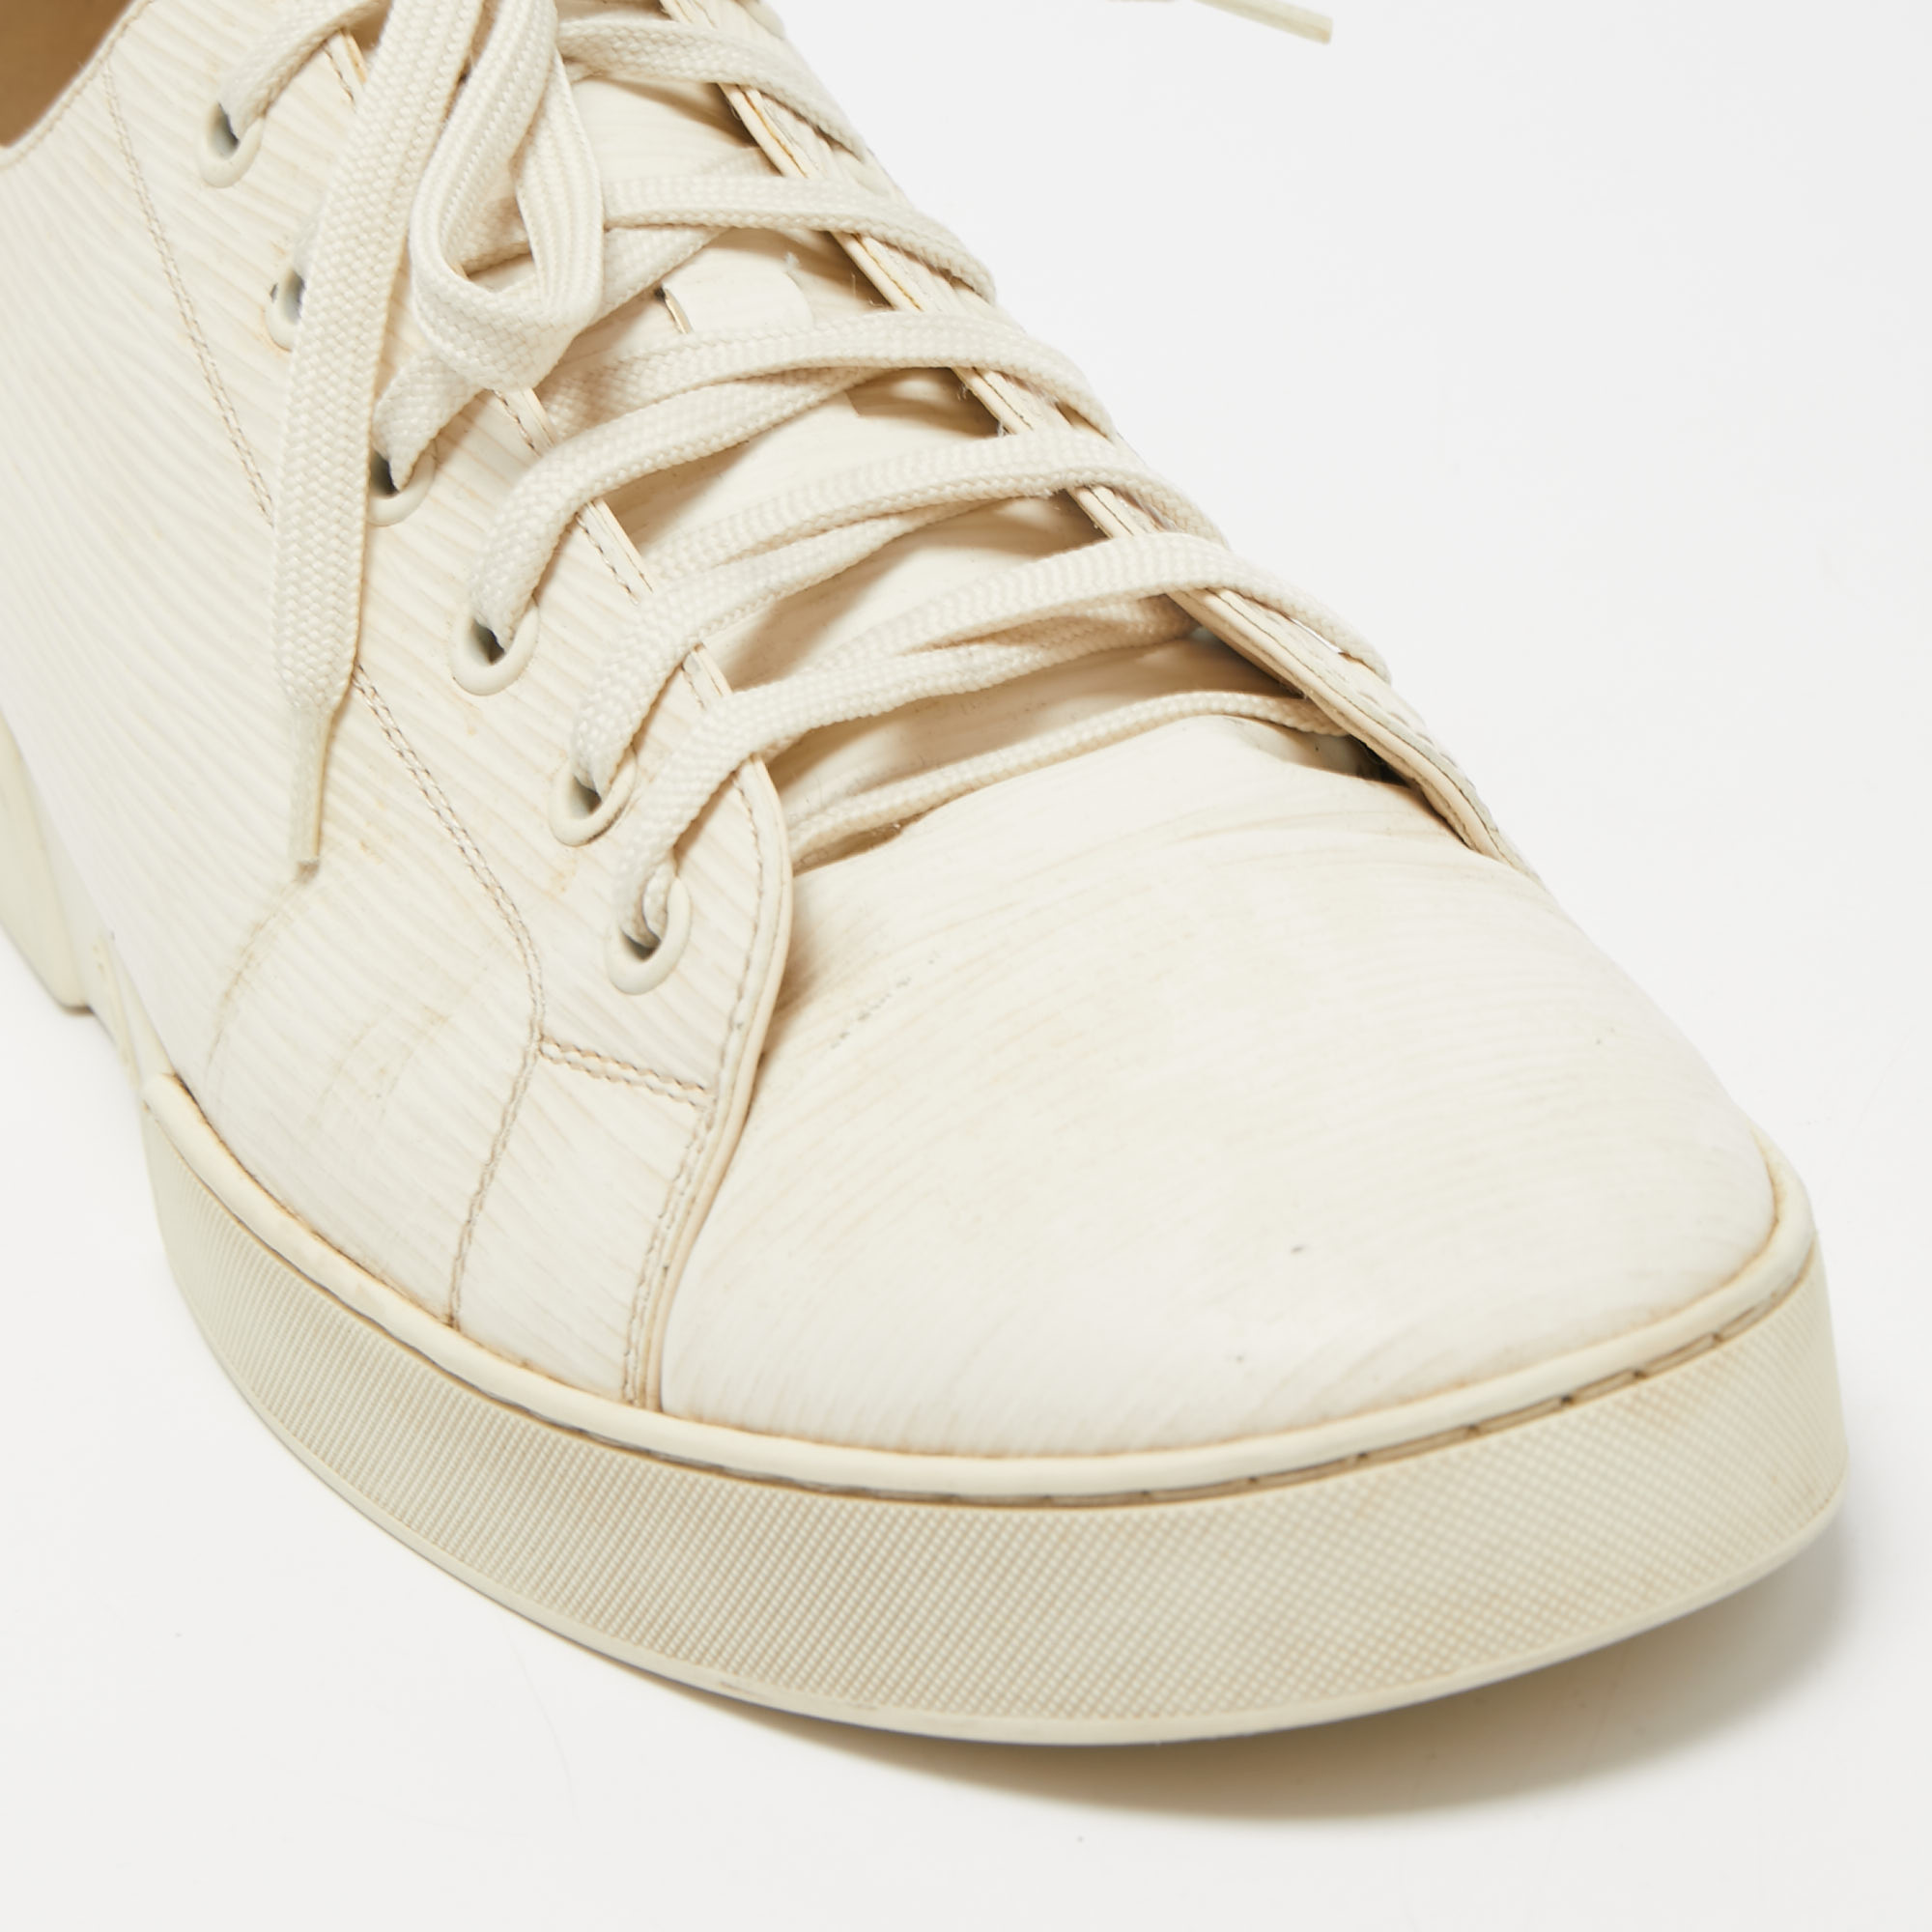 Louis Vuitton Cream Epi Leather Match Up Sneakers Size 43